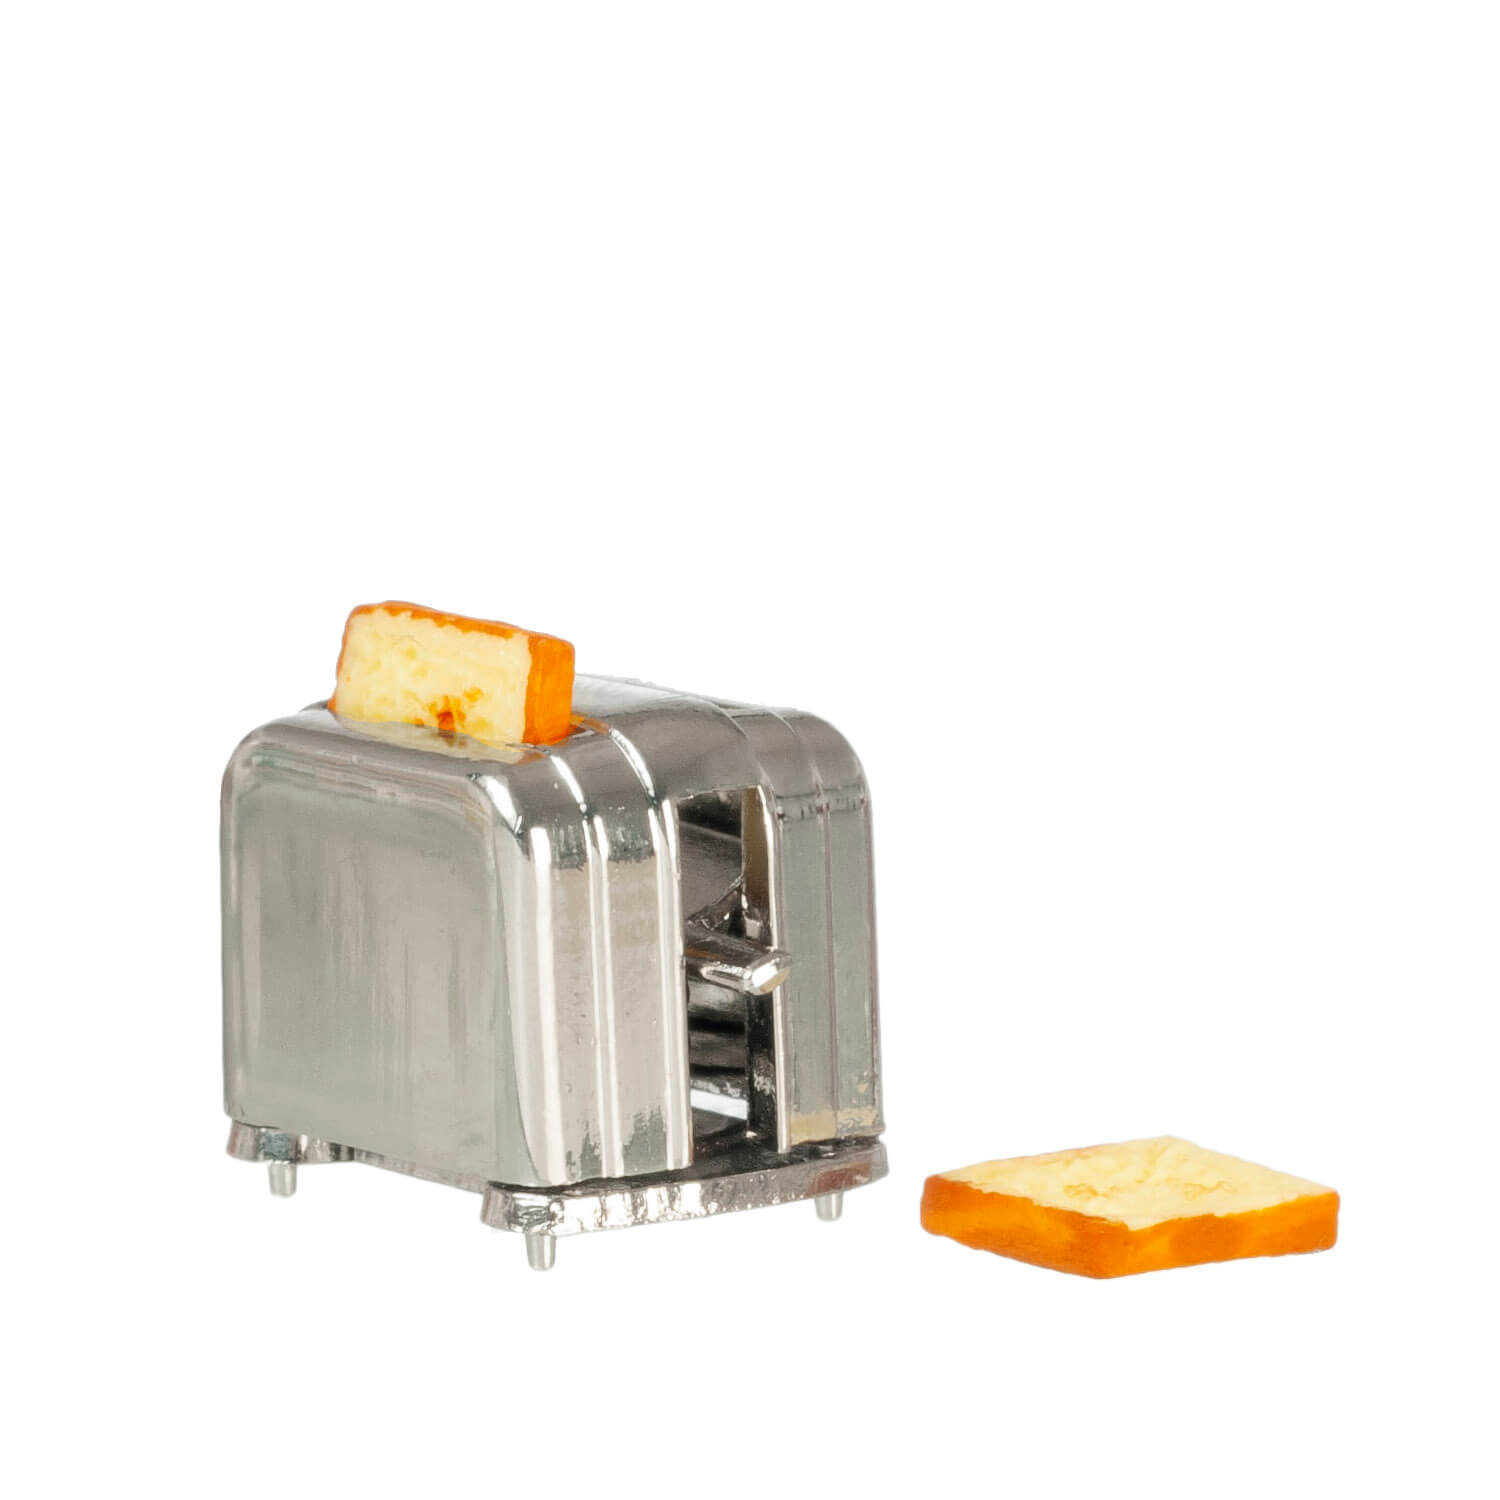 Toaster w/ 2 Slices of Bread